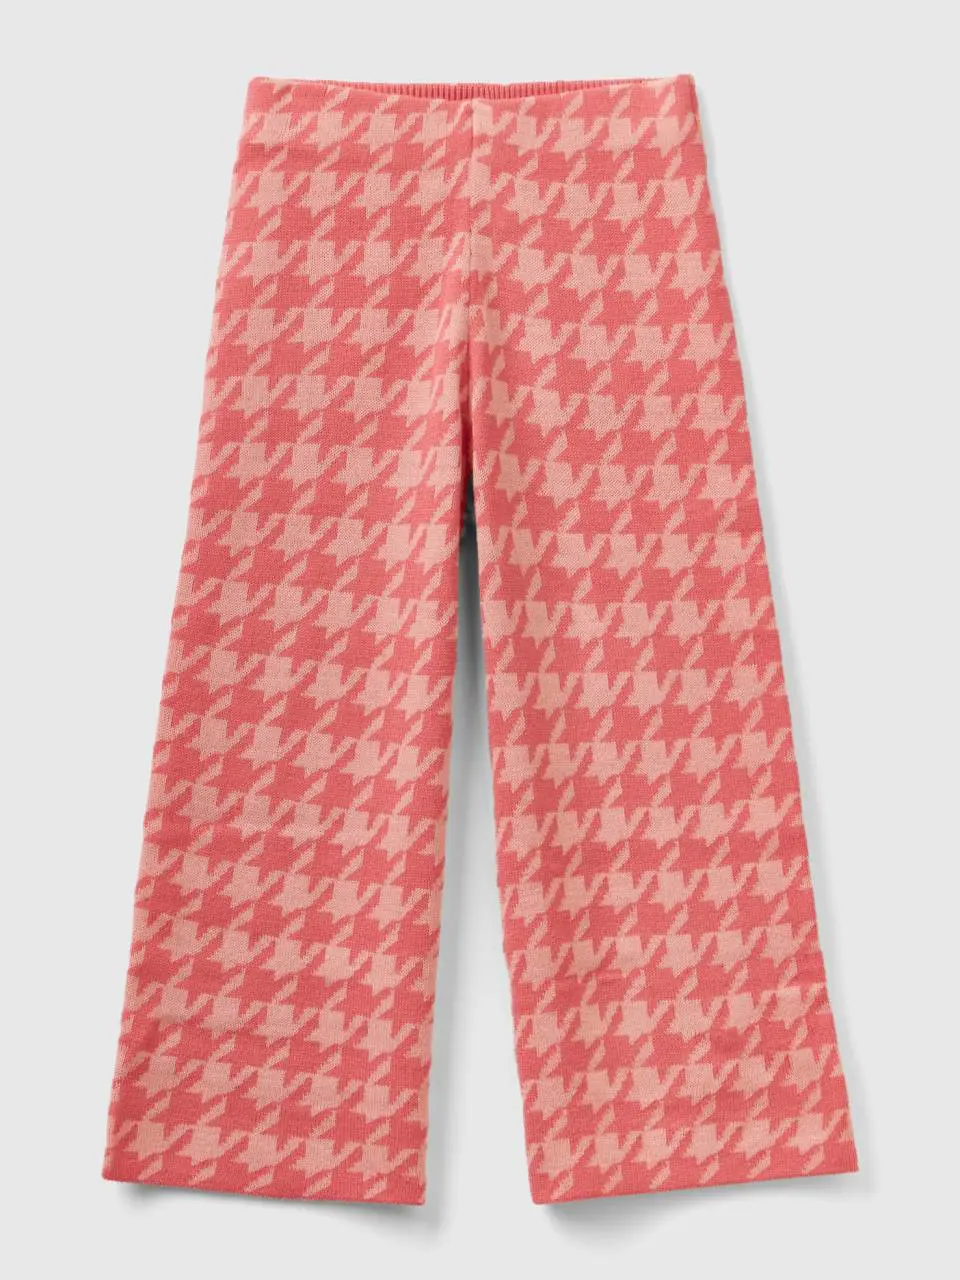 Benetton knit houndstooth trousers. 1